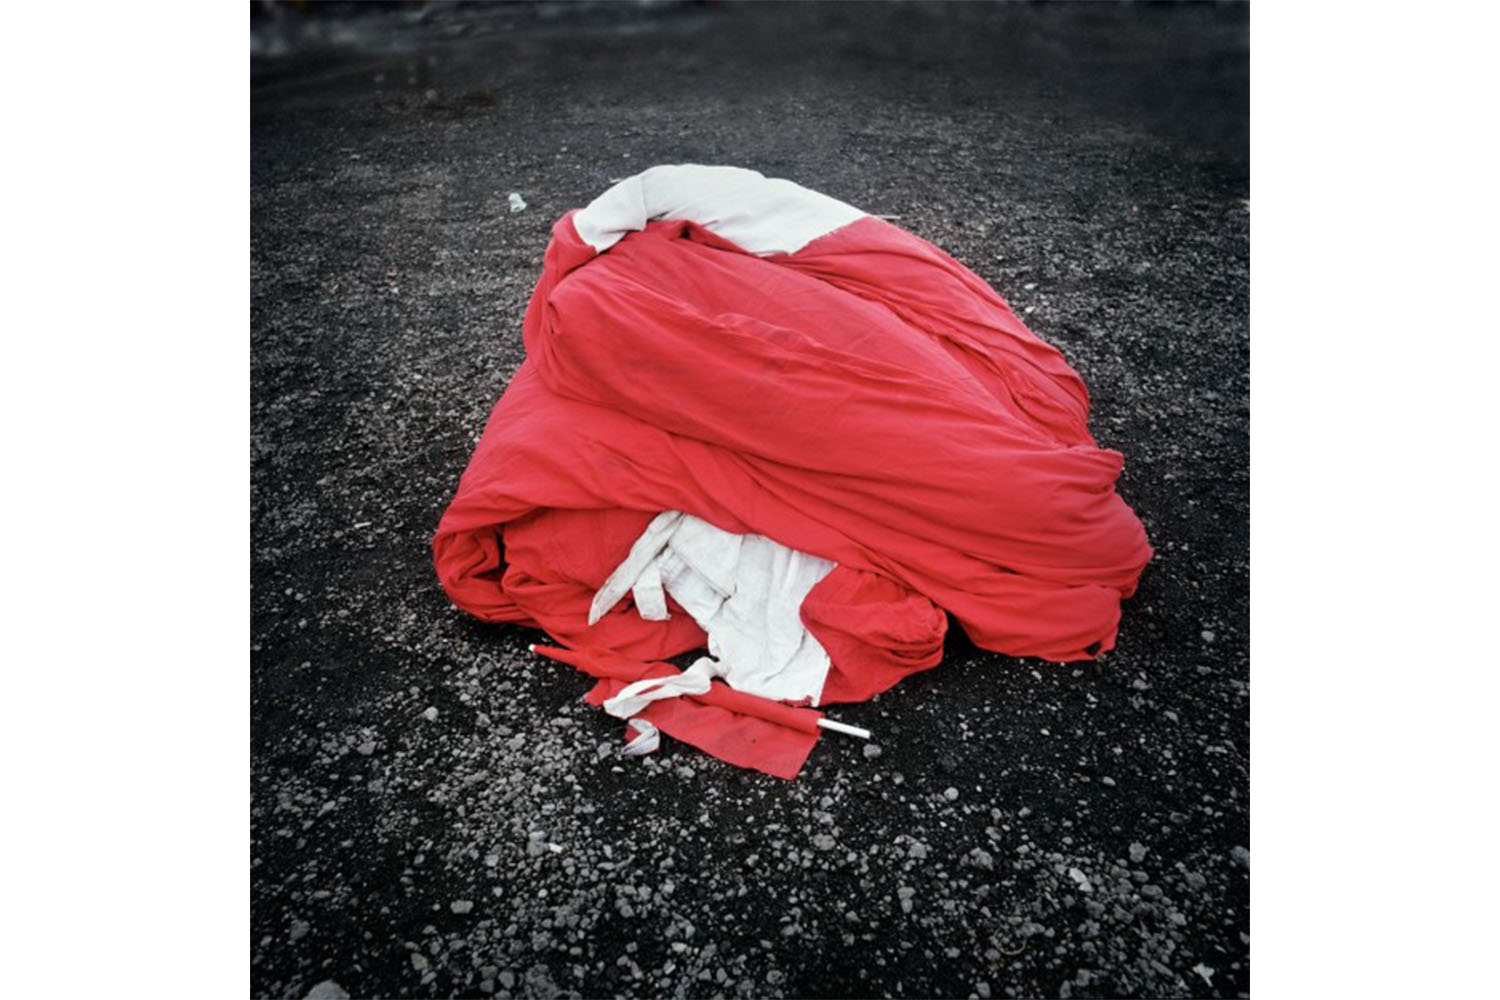 Redeployment_48, from the series ''Nothing Suprising'', 2008